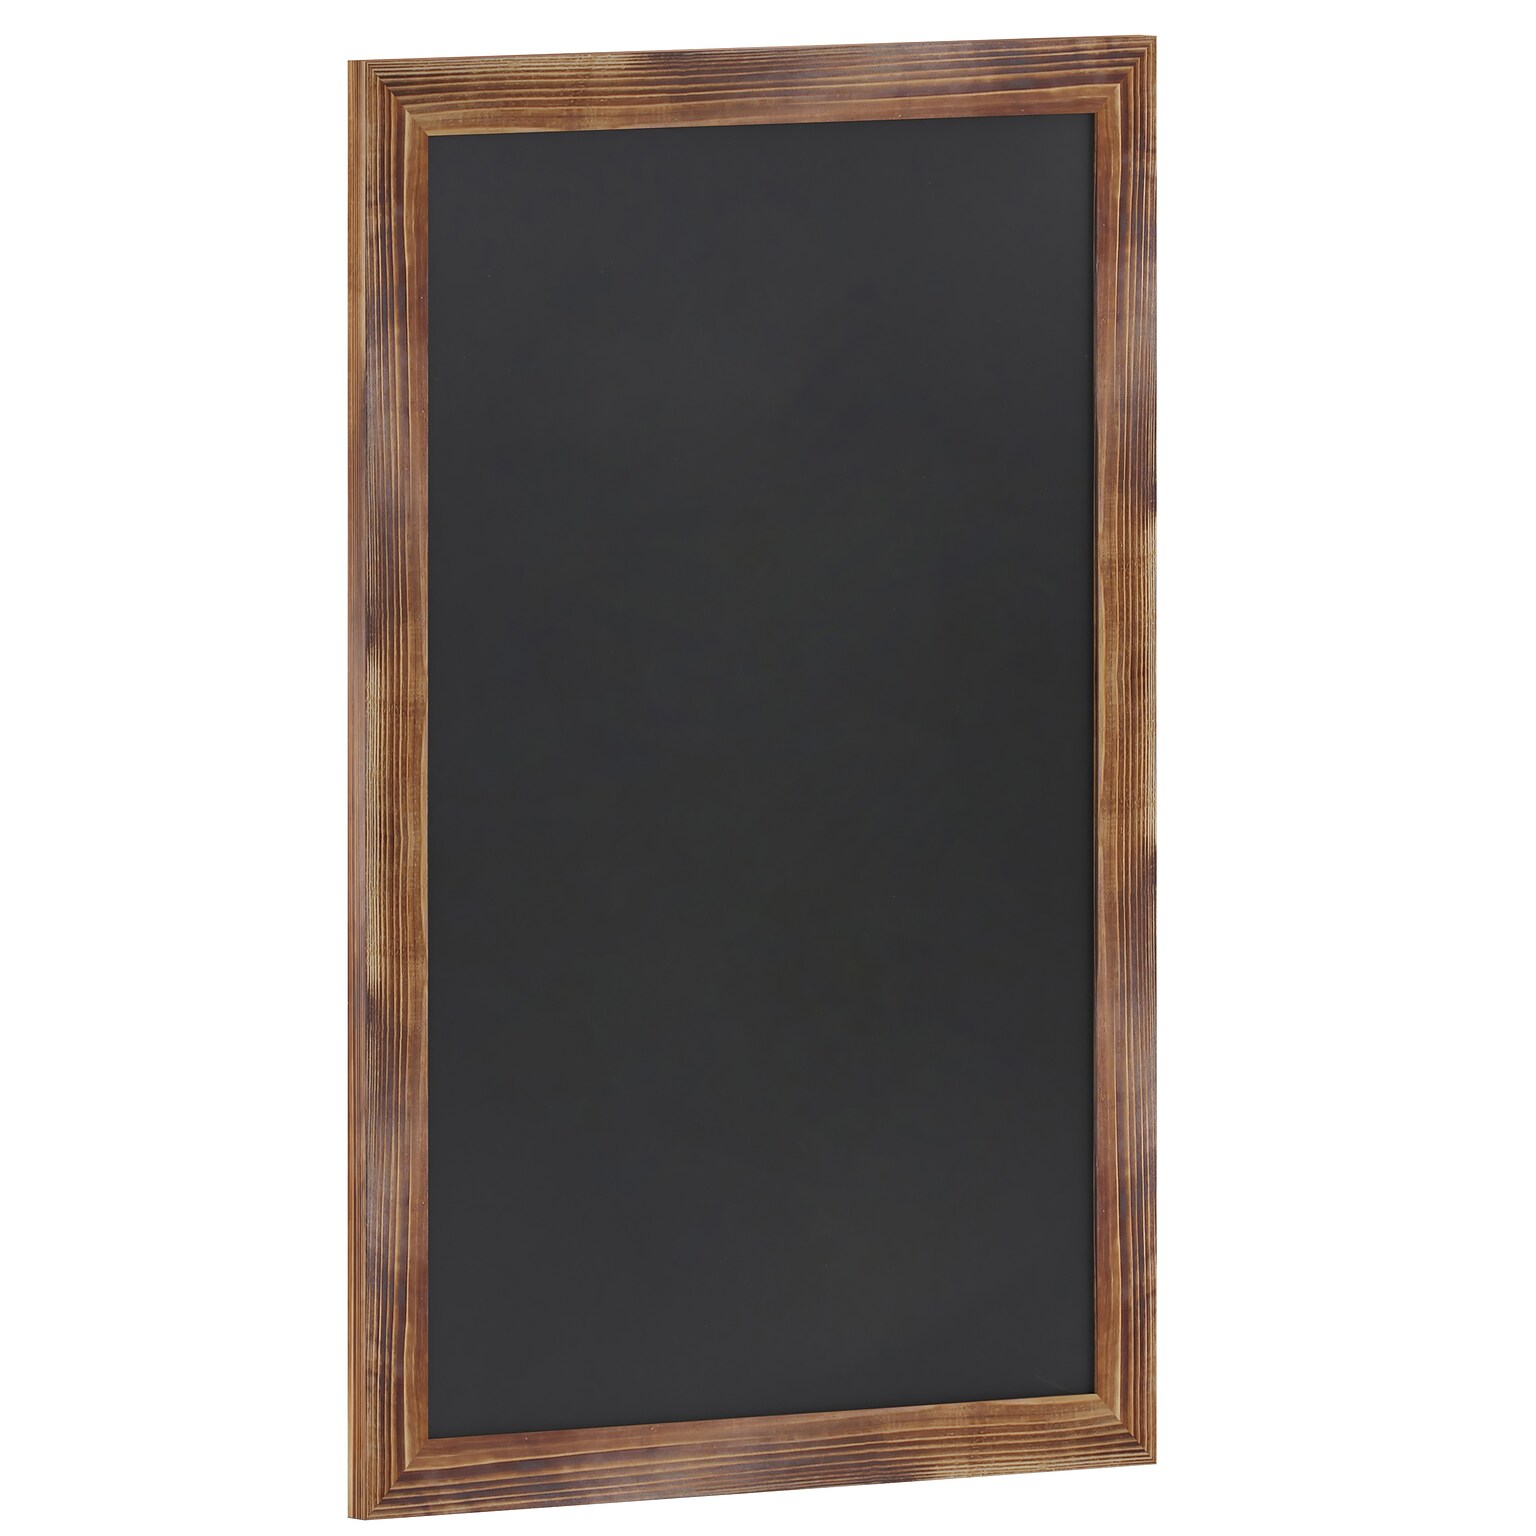 Flash Furniture Canterbury Wall Mount Magnetic Chalkboard Sign, Torched, 24 x 36 (HGWA3GD791315)